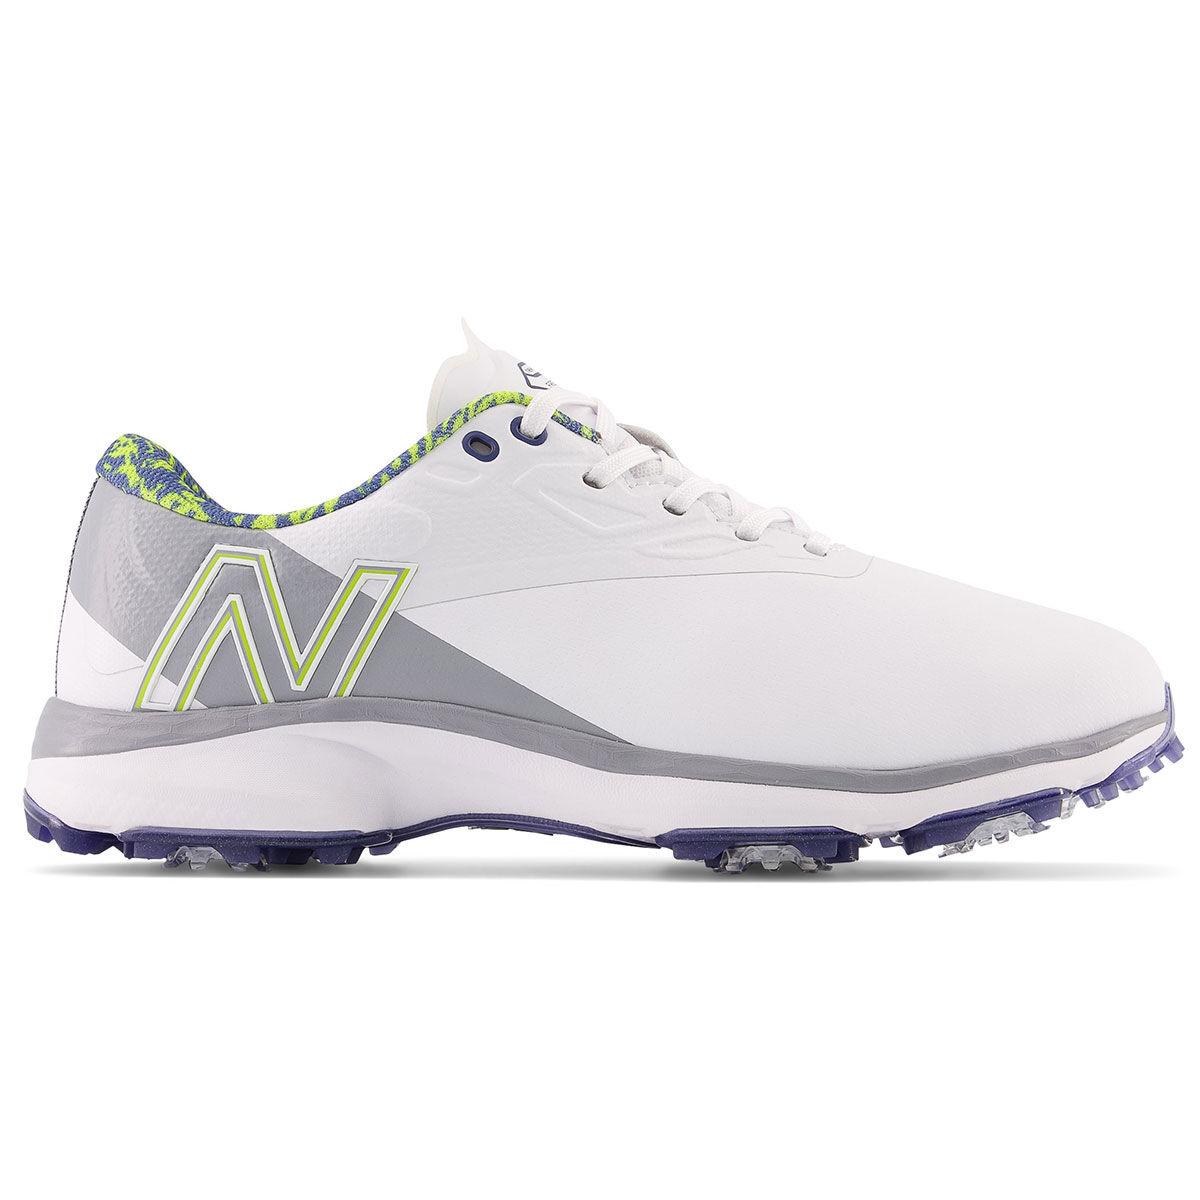 New Balance Men’s White and Grey Lightweight Fresh Foam X Defender Waterproof Spiked Golf Shoes, Size: 9.5 | American Golf